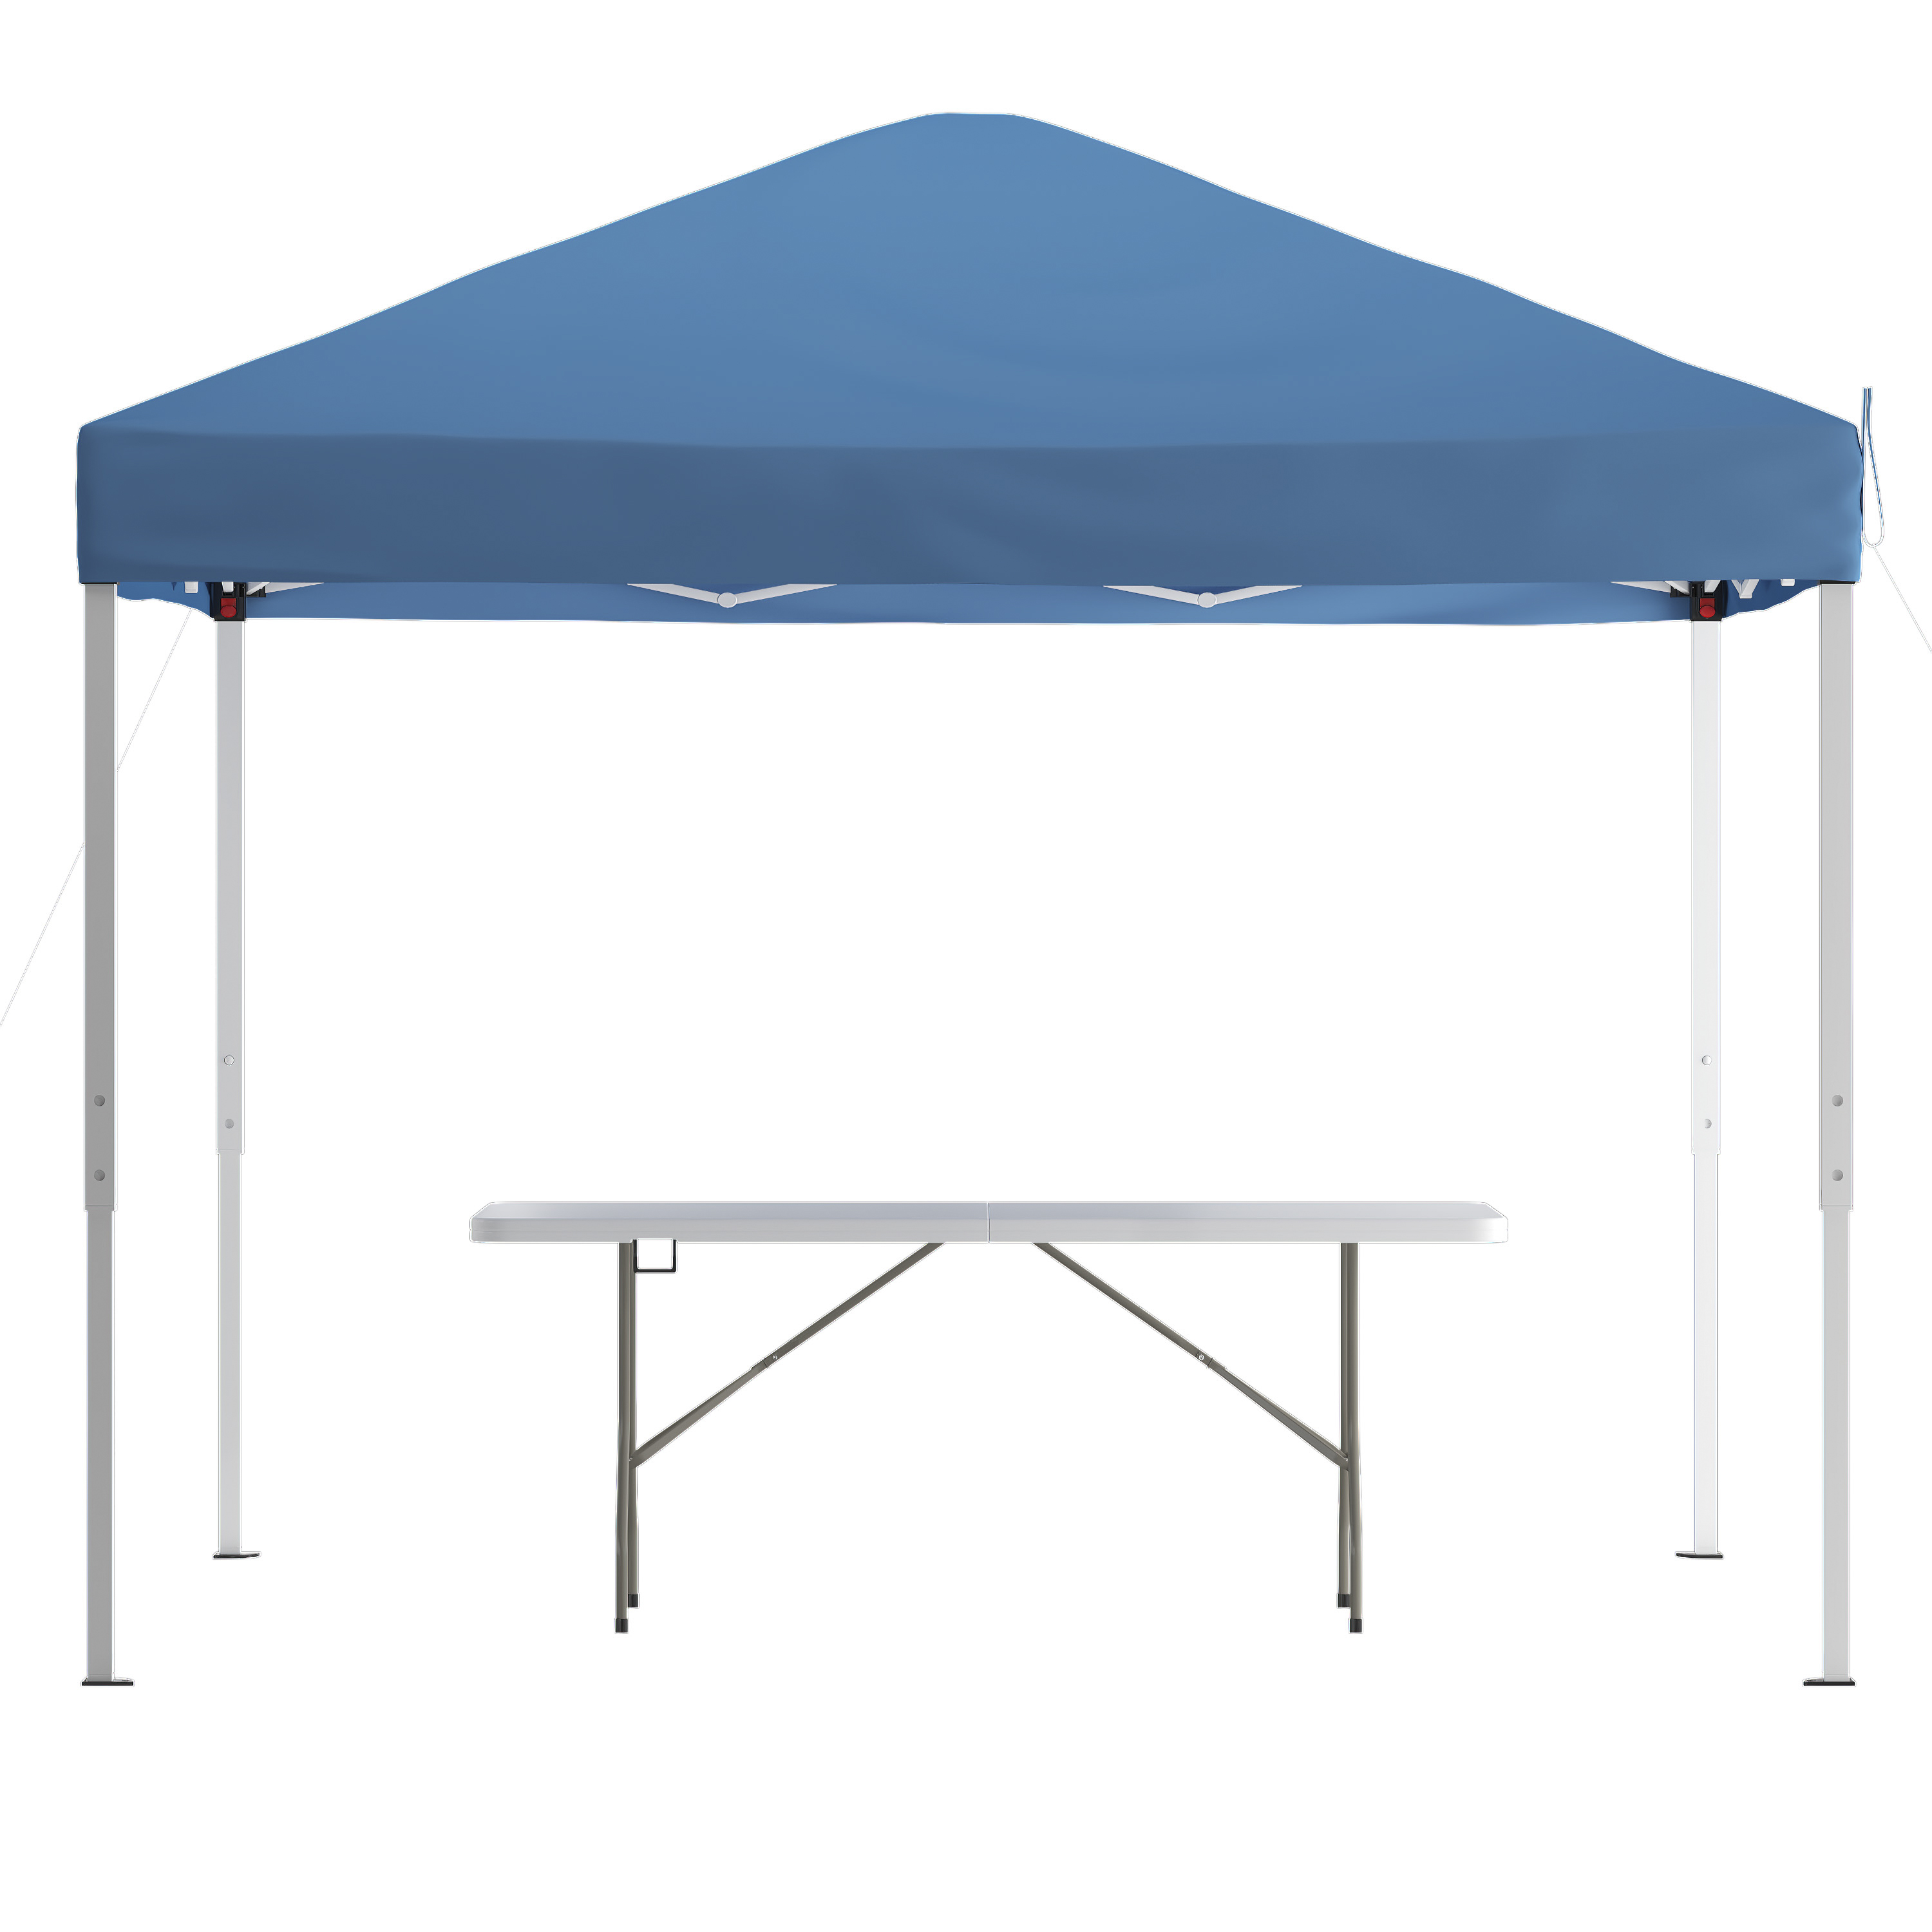 Flash Furniture JJ-GZ10183Z-BL-GG Otis 10' x 10' Blue Pop Up Canopy Tent with Carry Bag and 6' Bi-Fold Folding Table